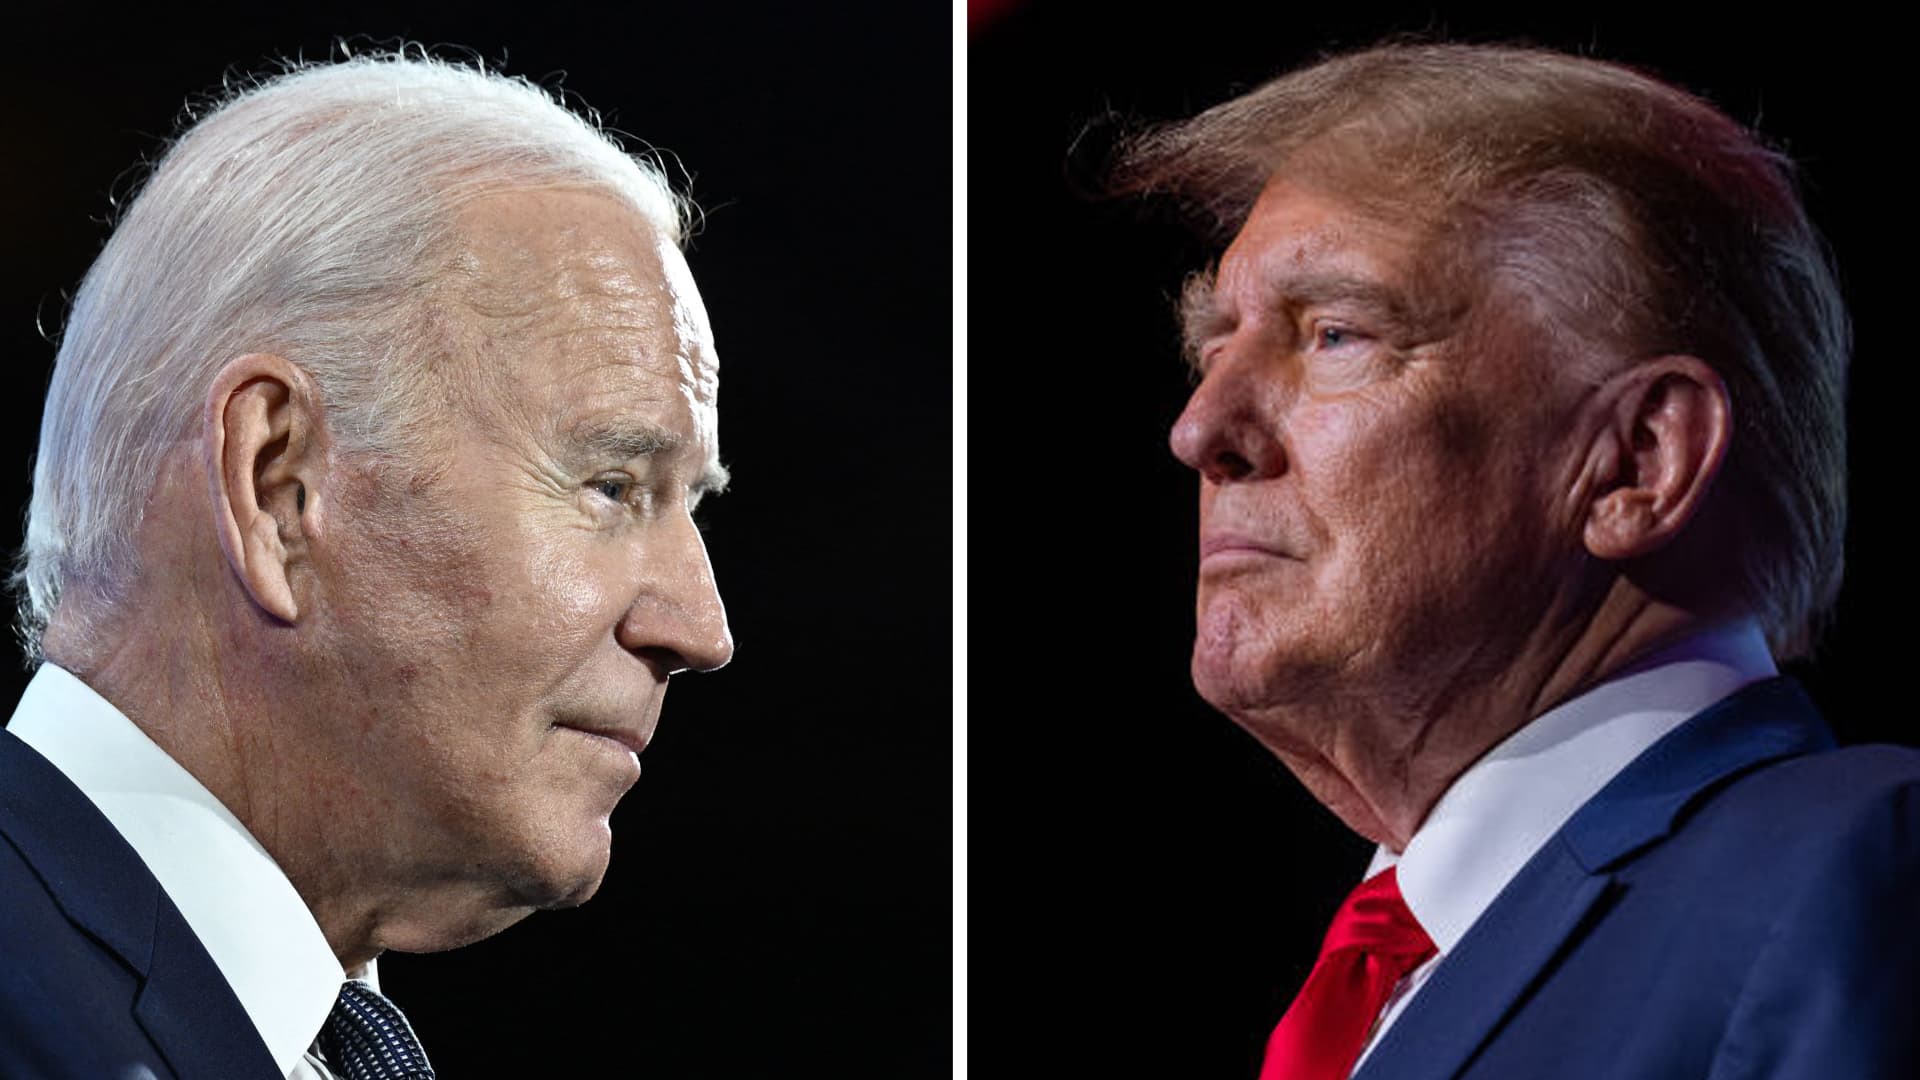 Biden and Trump both want to extend tax cuts for most Americans — but paying for it could be tricky